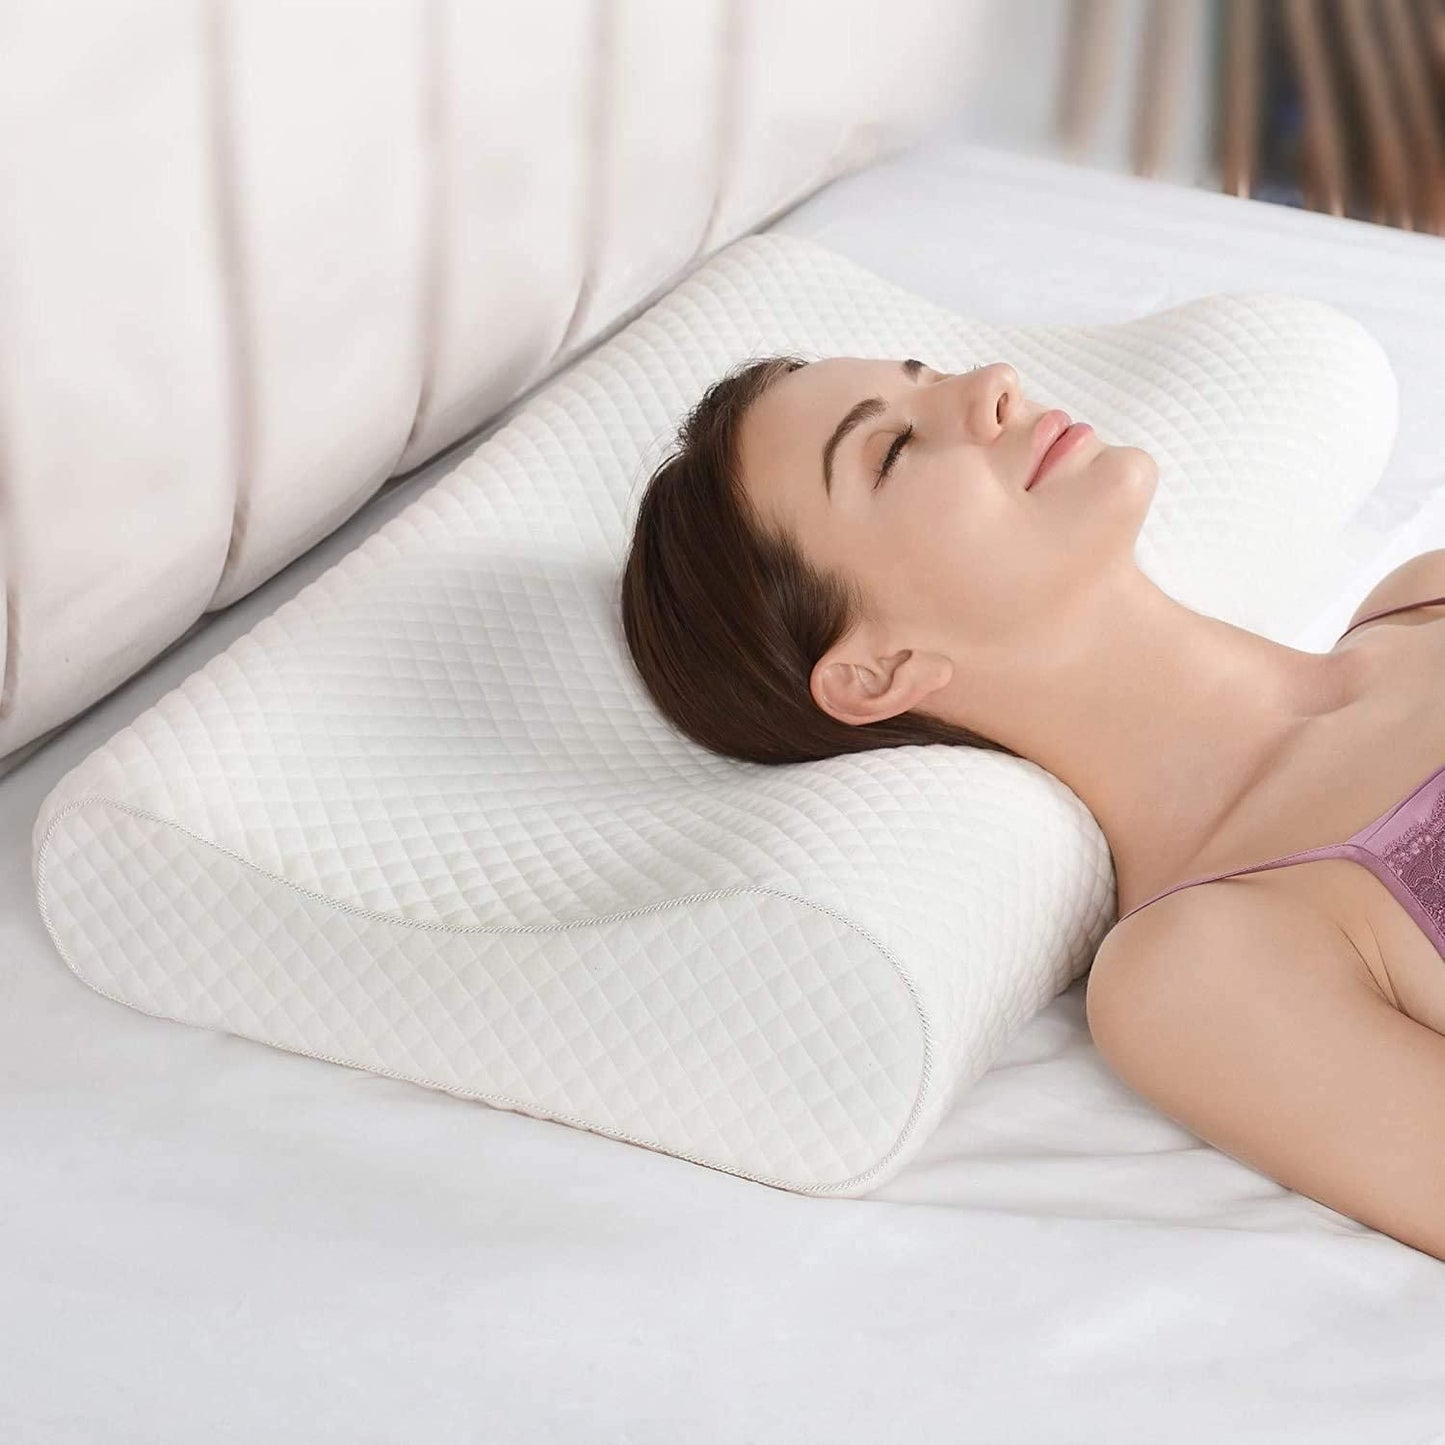 Life Good - Cervical Memory Foam Orthopedic Pillow For Neck Pain Relief